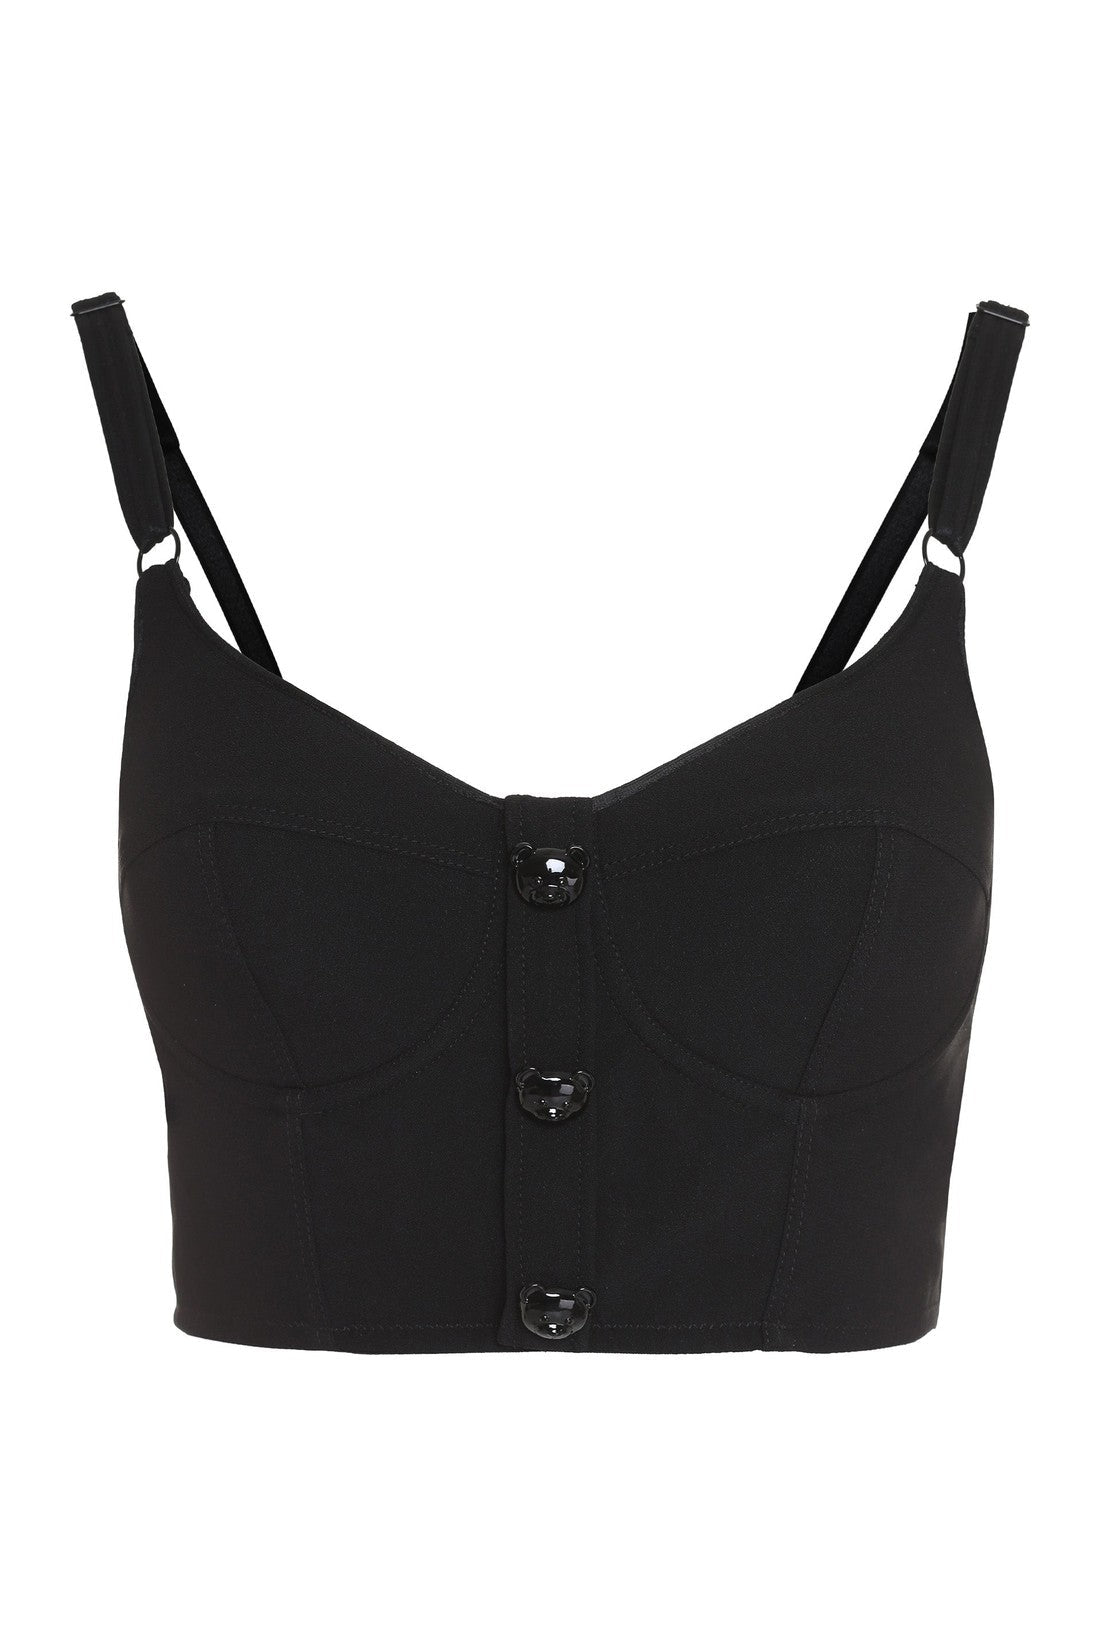 Moschino-OUTLET-SALE-Fabric crop top-ARCHIVIST